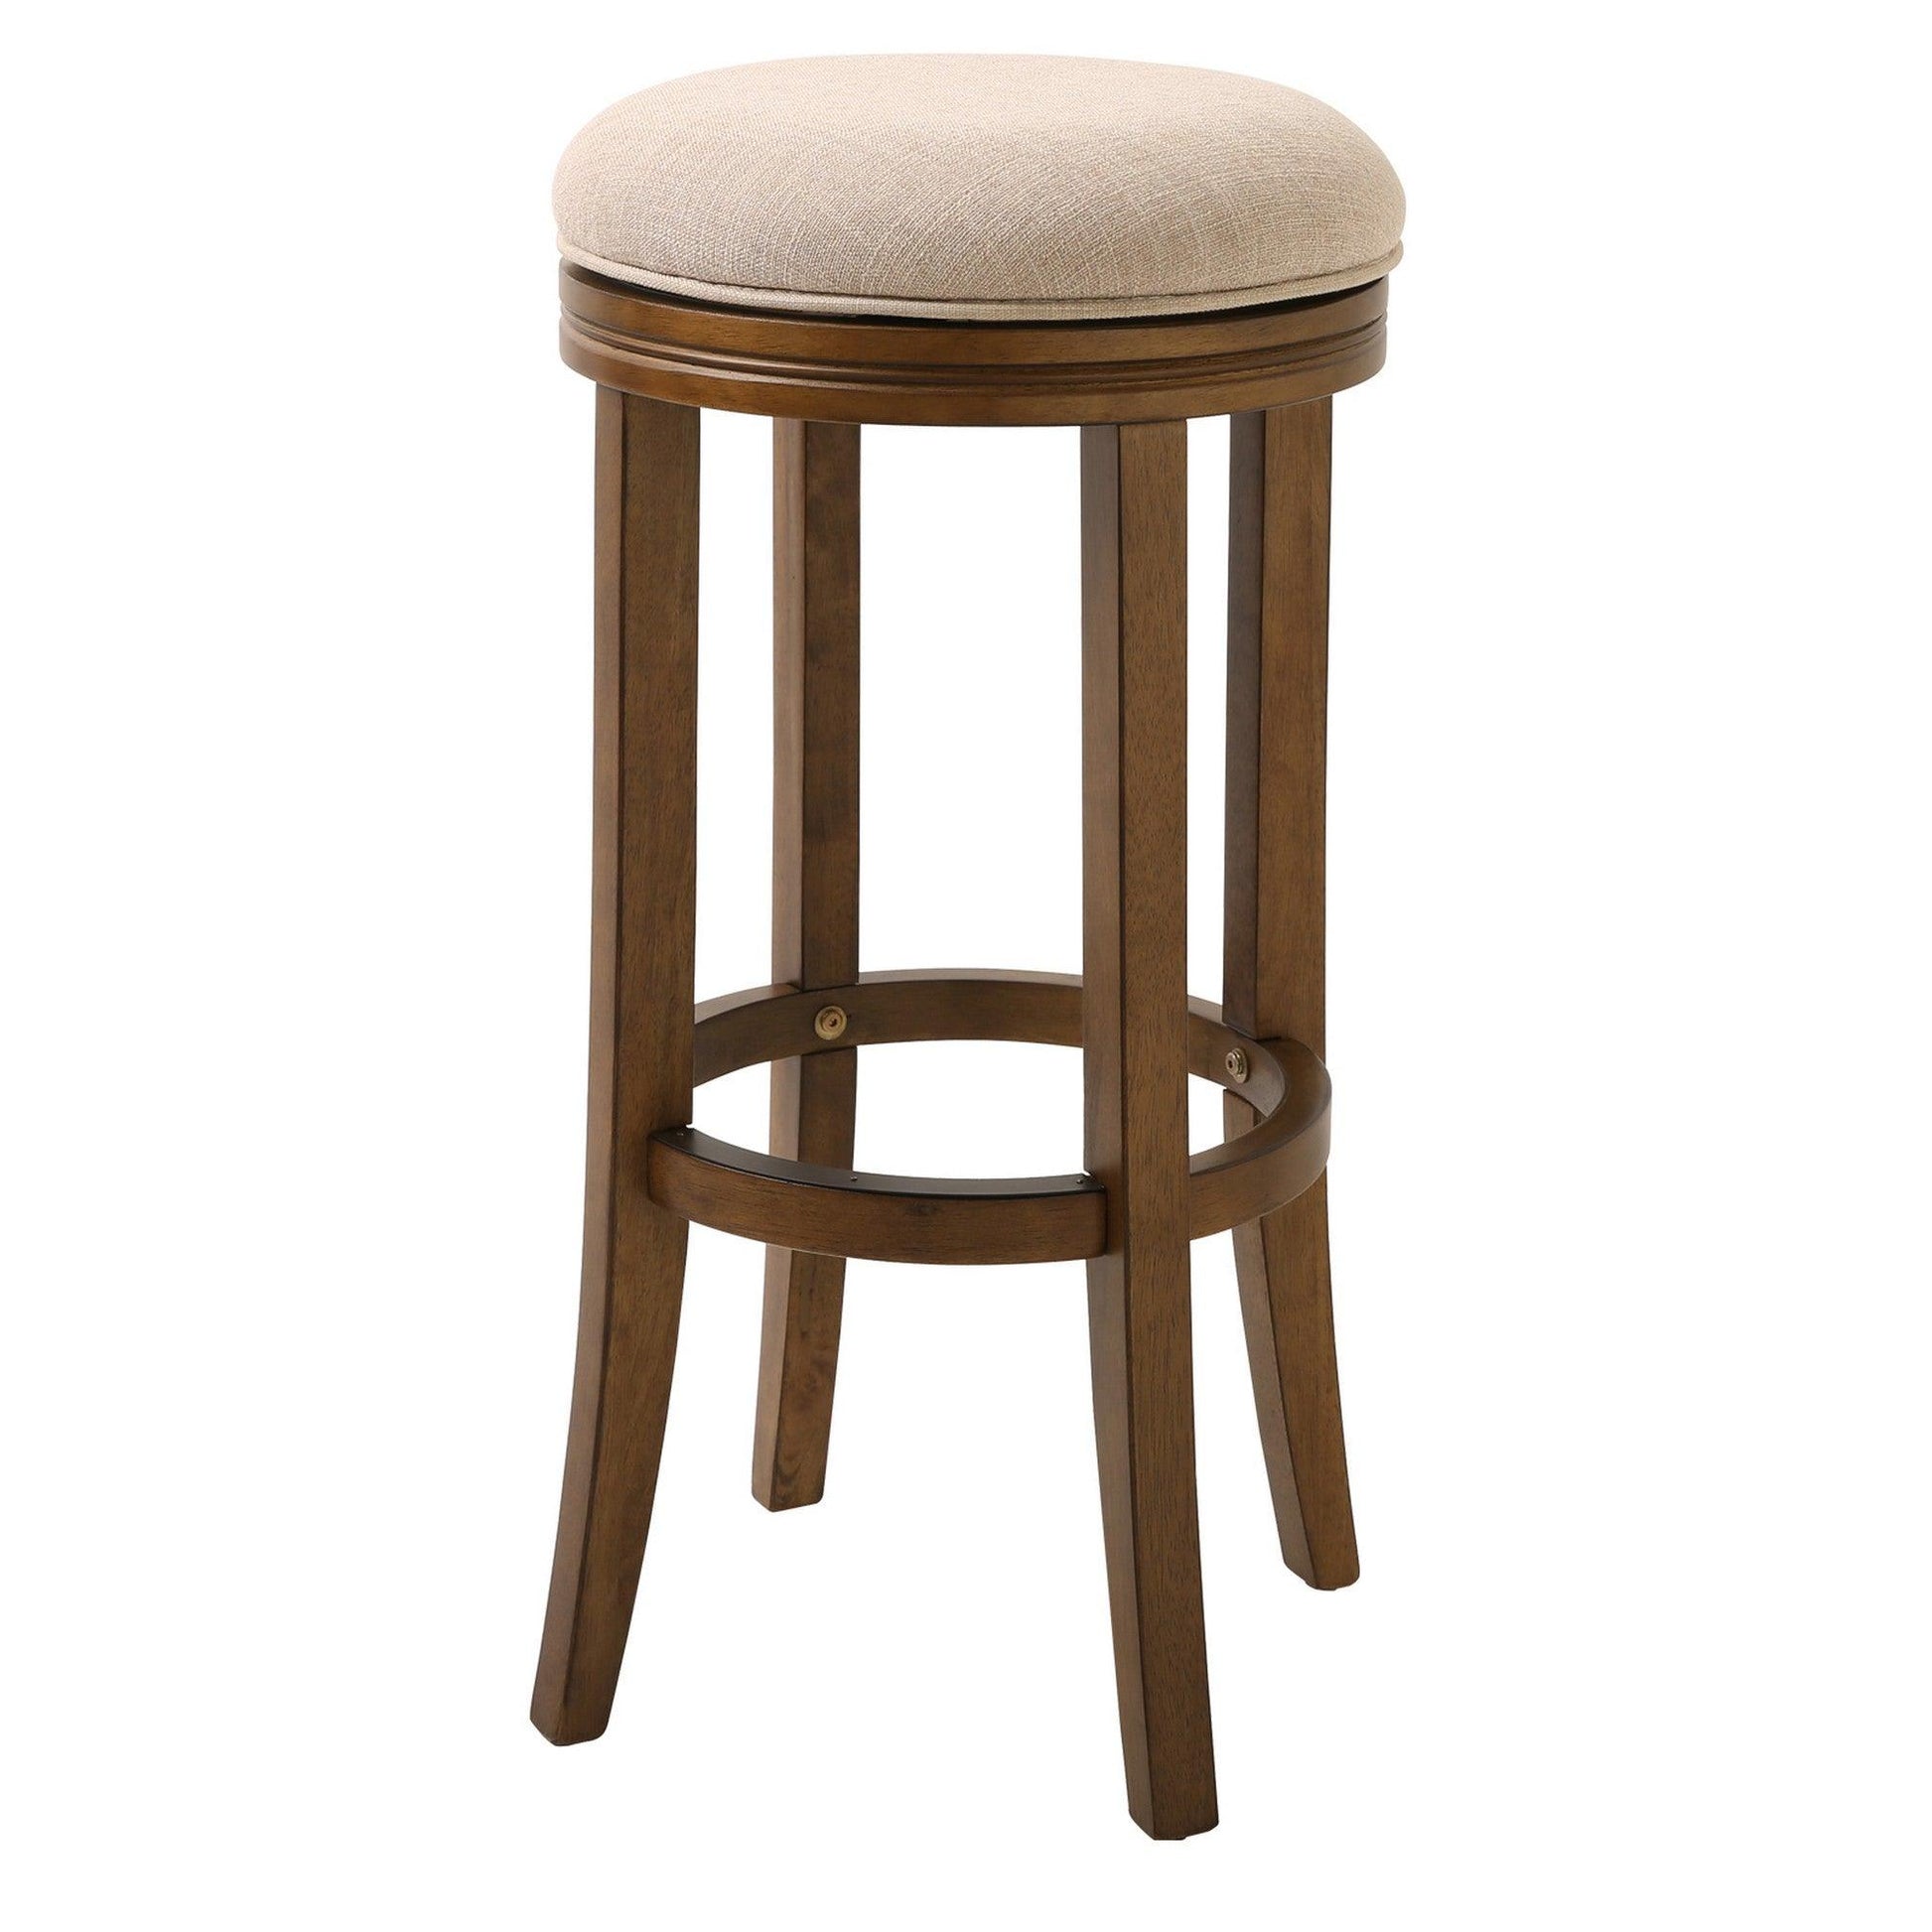 30" Honeysuckle Finished Solid Wood Frame With Cream Fabric Bar Stool - FurniFindUSA